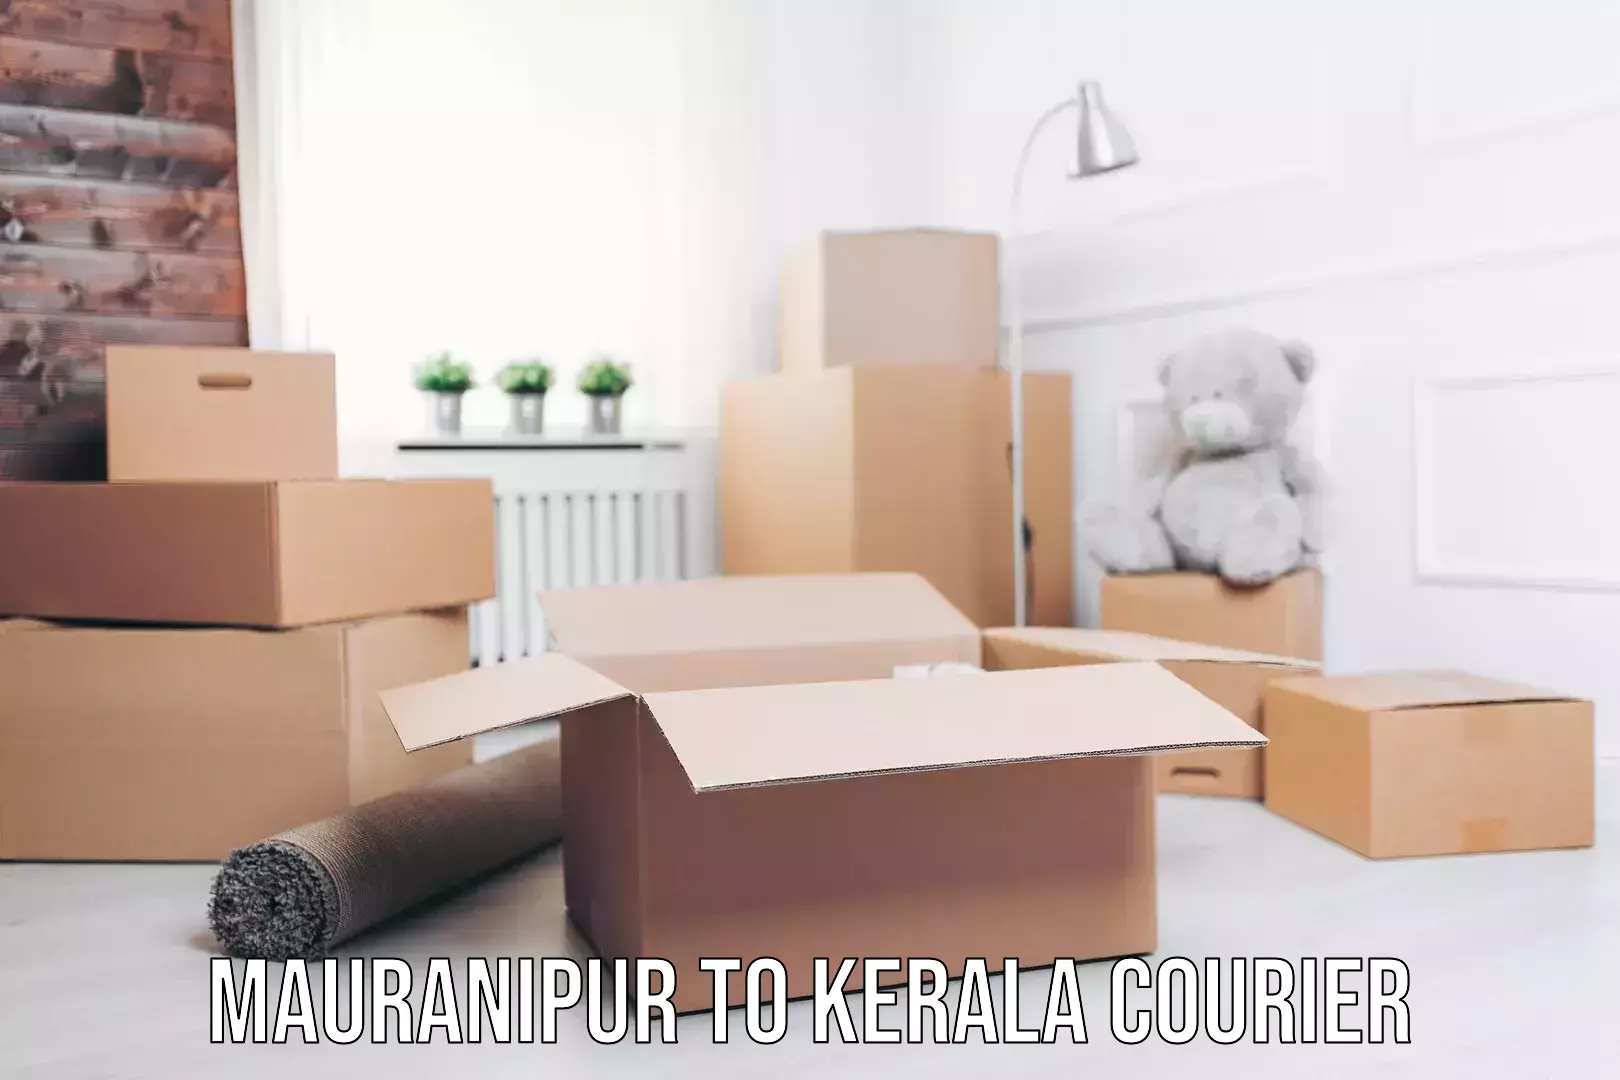 Specialized moving company Mauranipur to Kerala